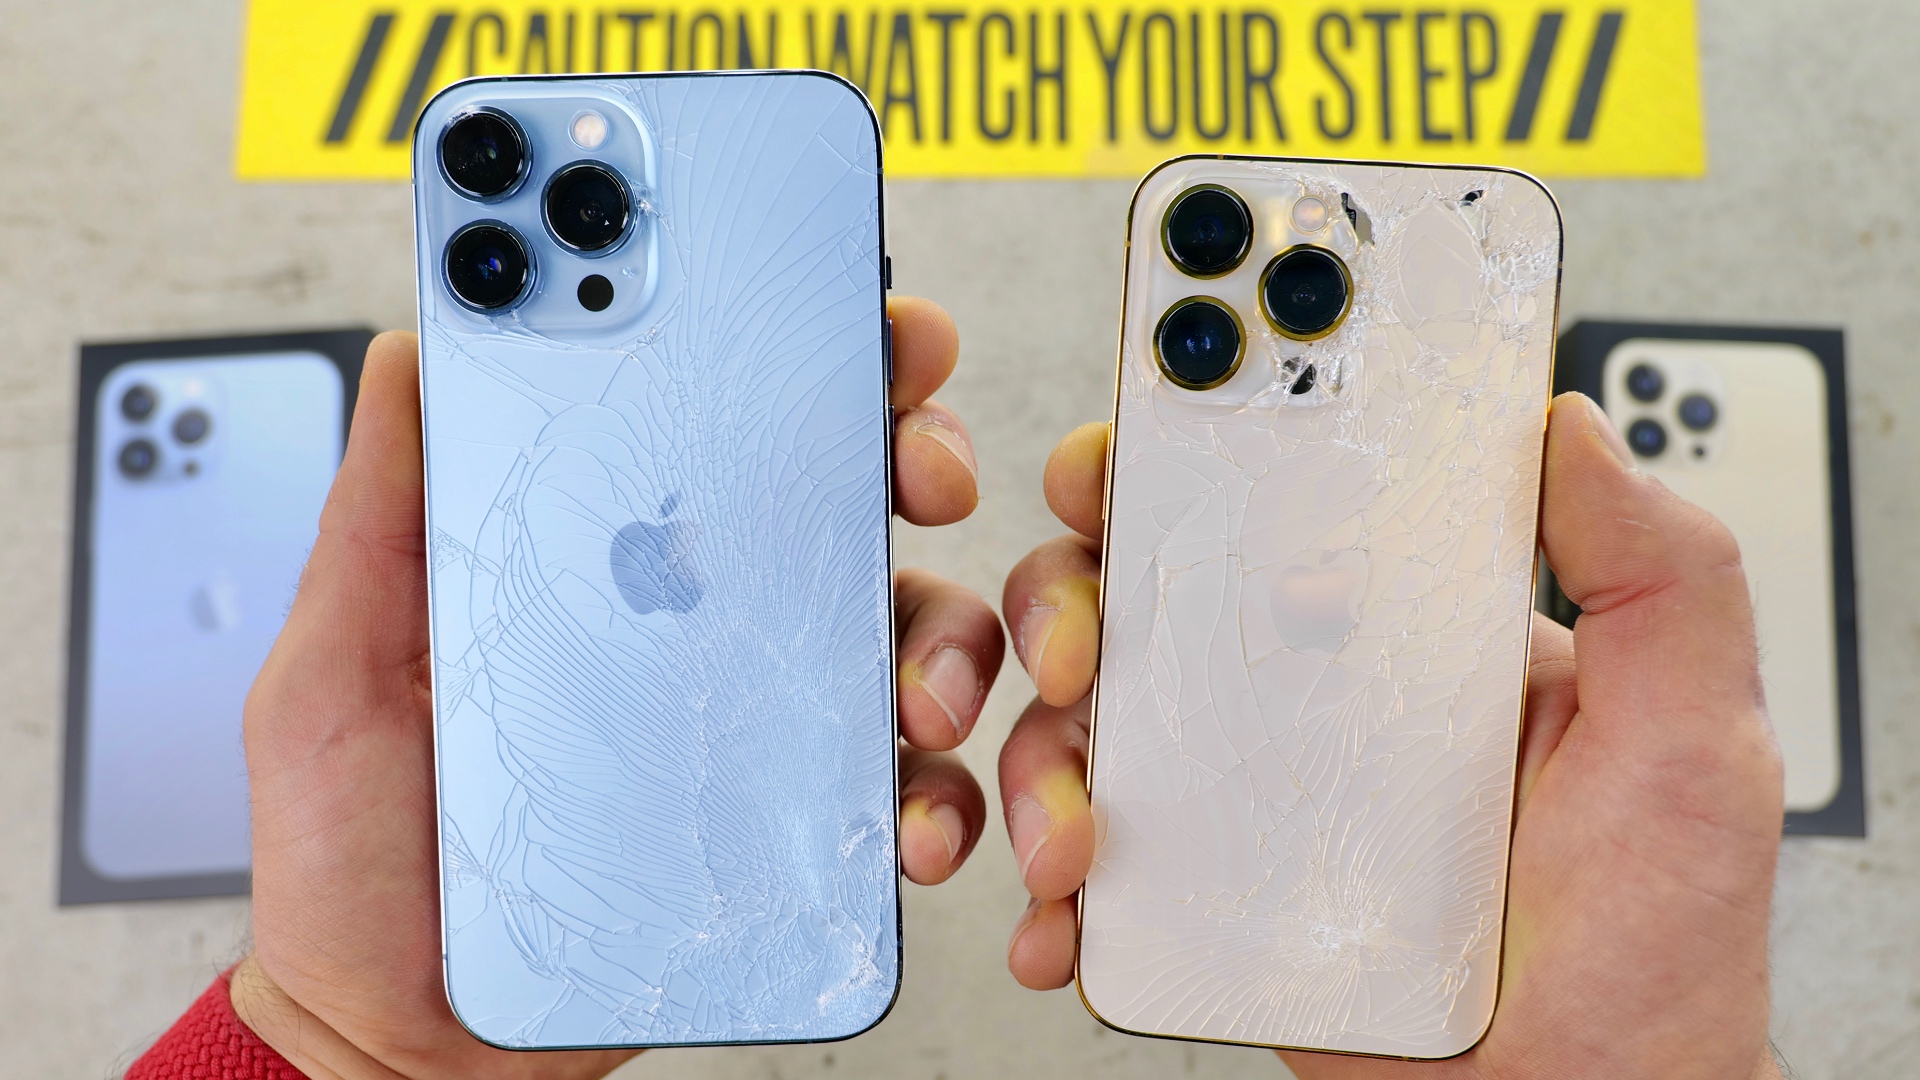 Iphone 13 Pro Max Durability Tested In New Video 9to5mac